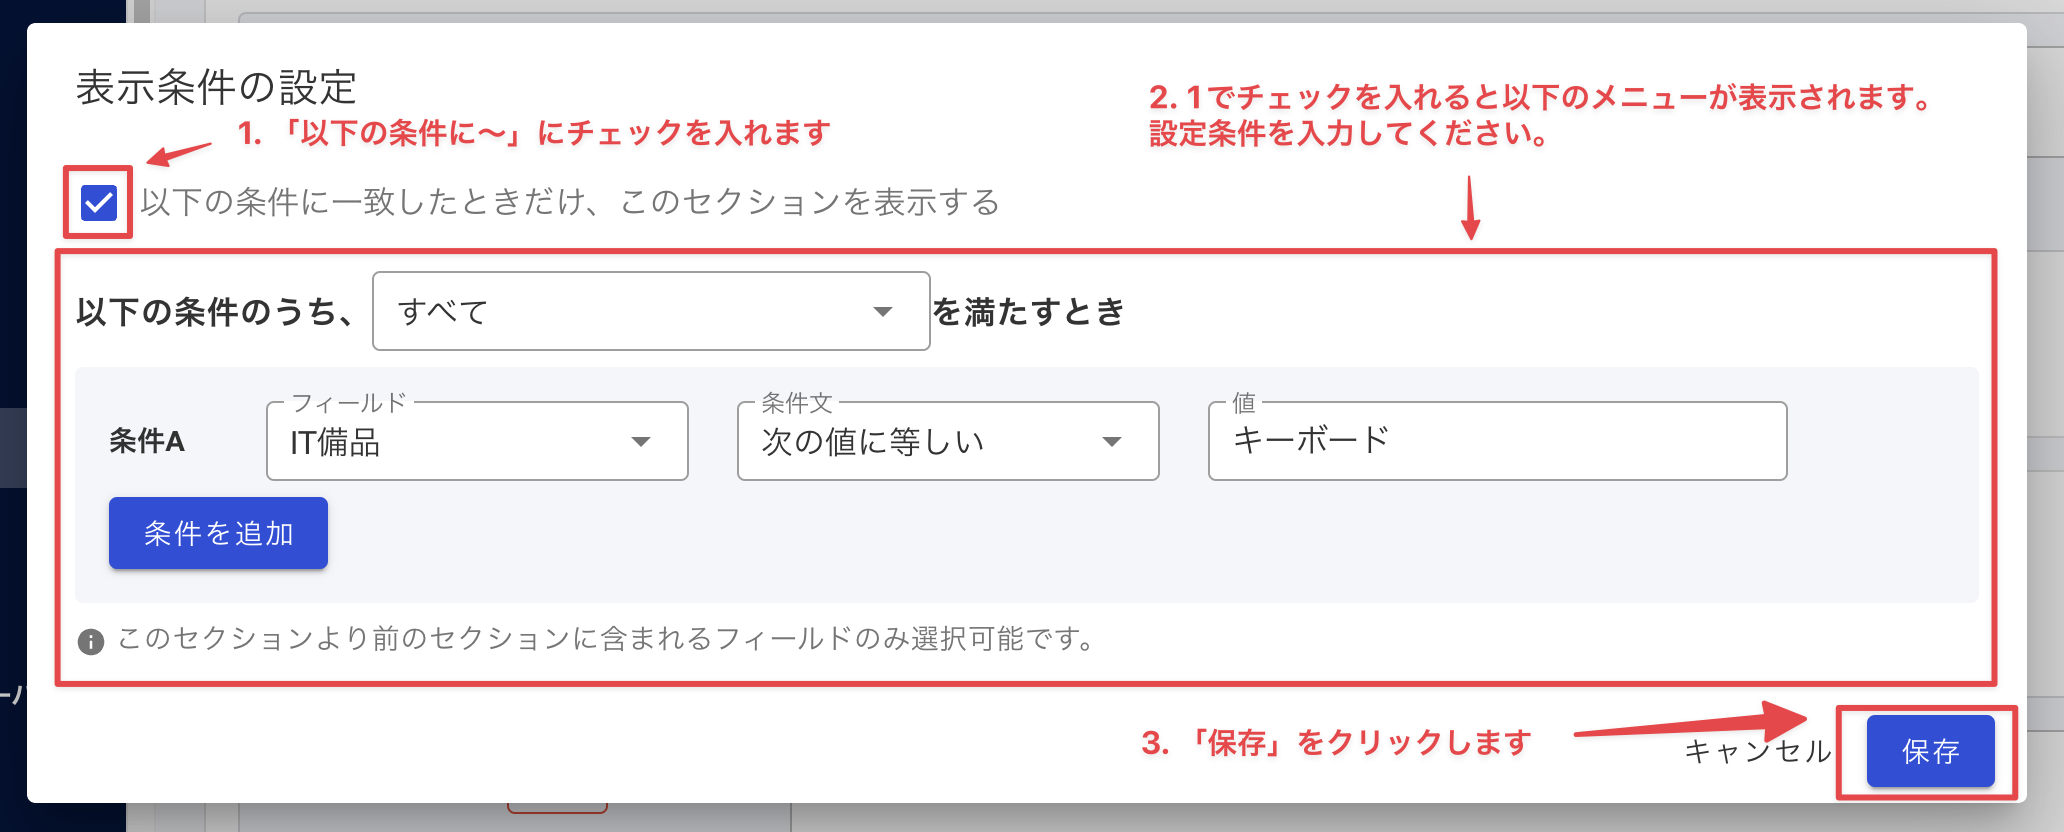 ticket_form4.png